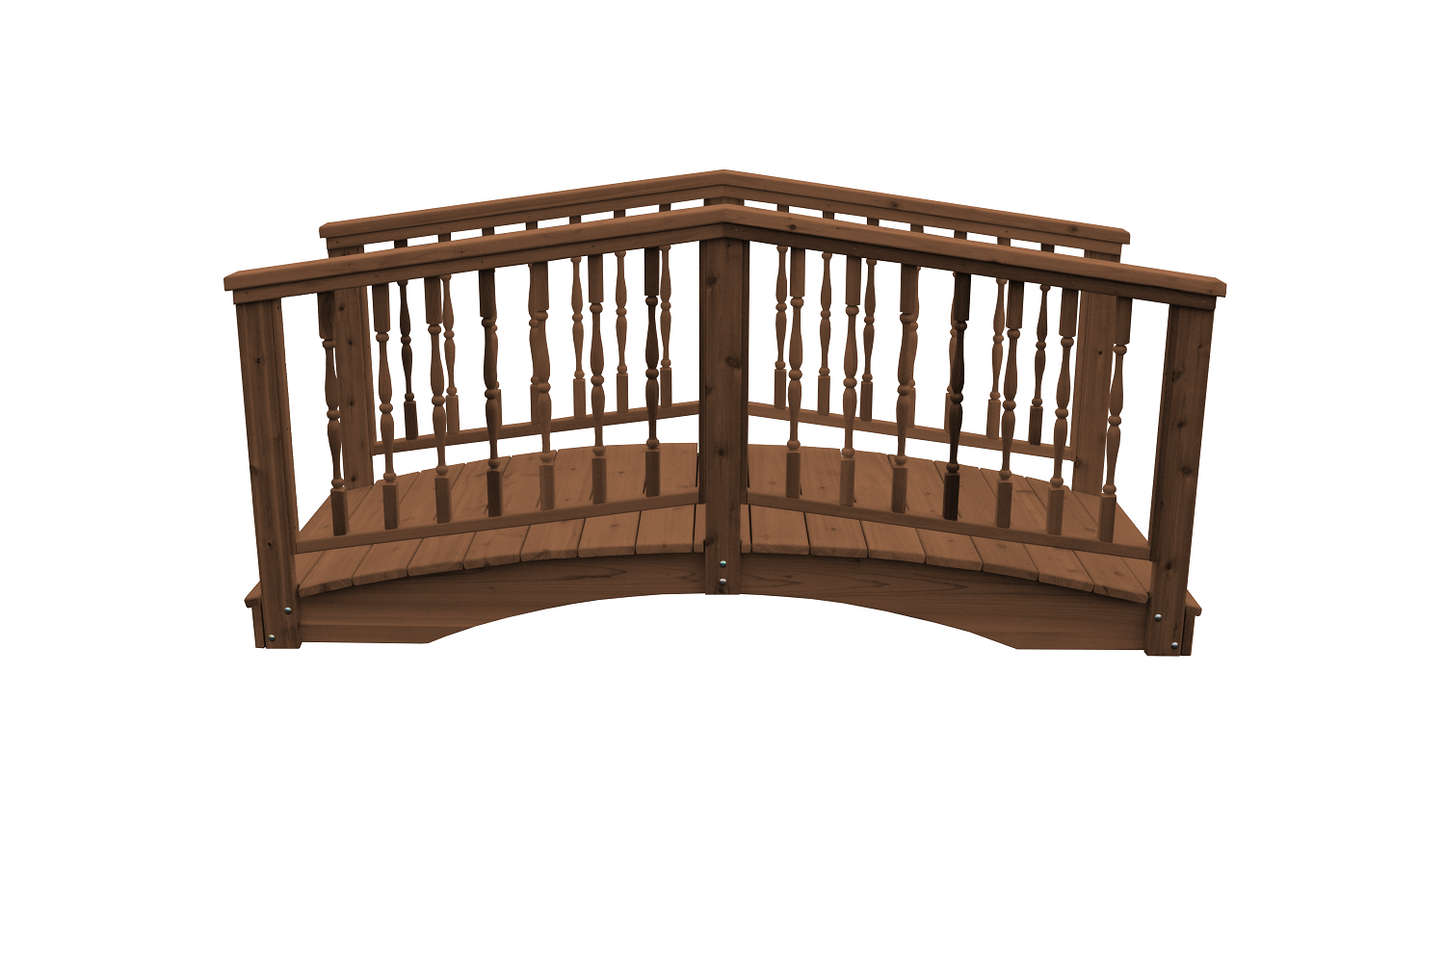 A&L Furniture Co. Western Red Cedar 3' x 6' Spindle Bridge - LEAD TIME TO SHIP 4 WEEKS OR LESS